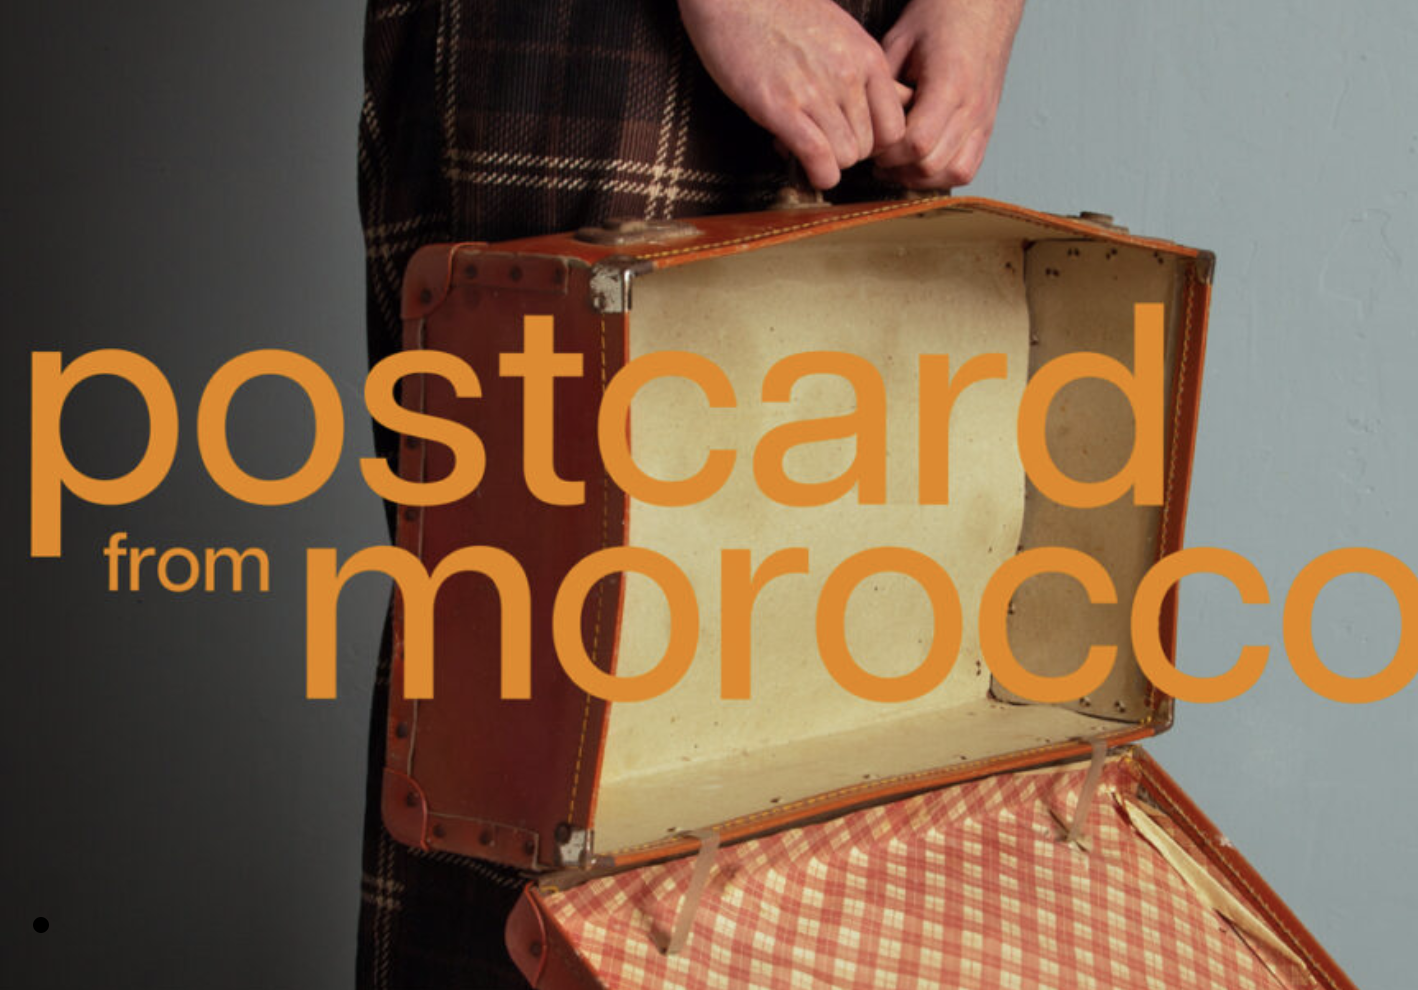 Royal Irish Academy of Music in collaboration with IADT present: Postcard from Morocco